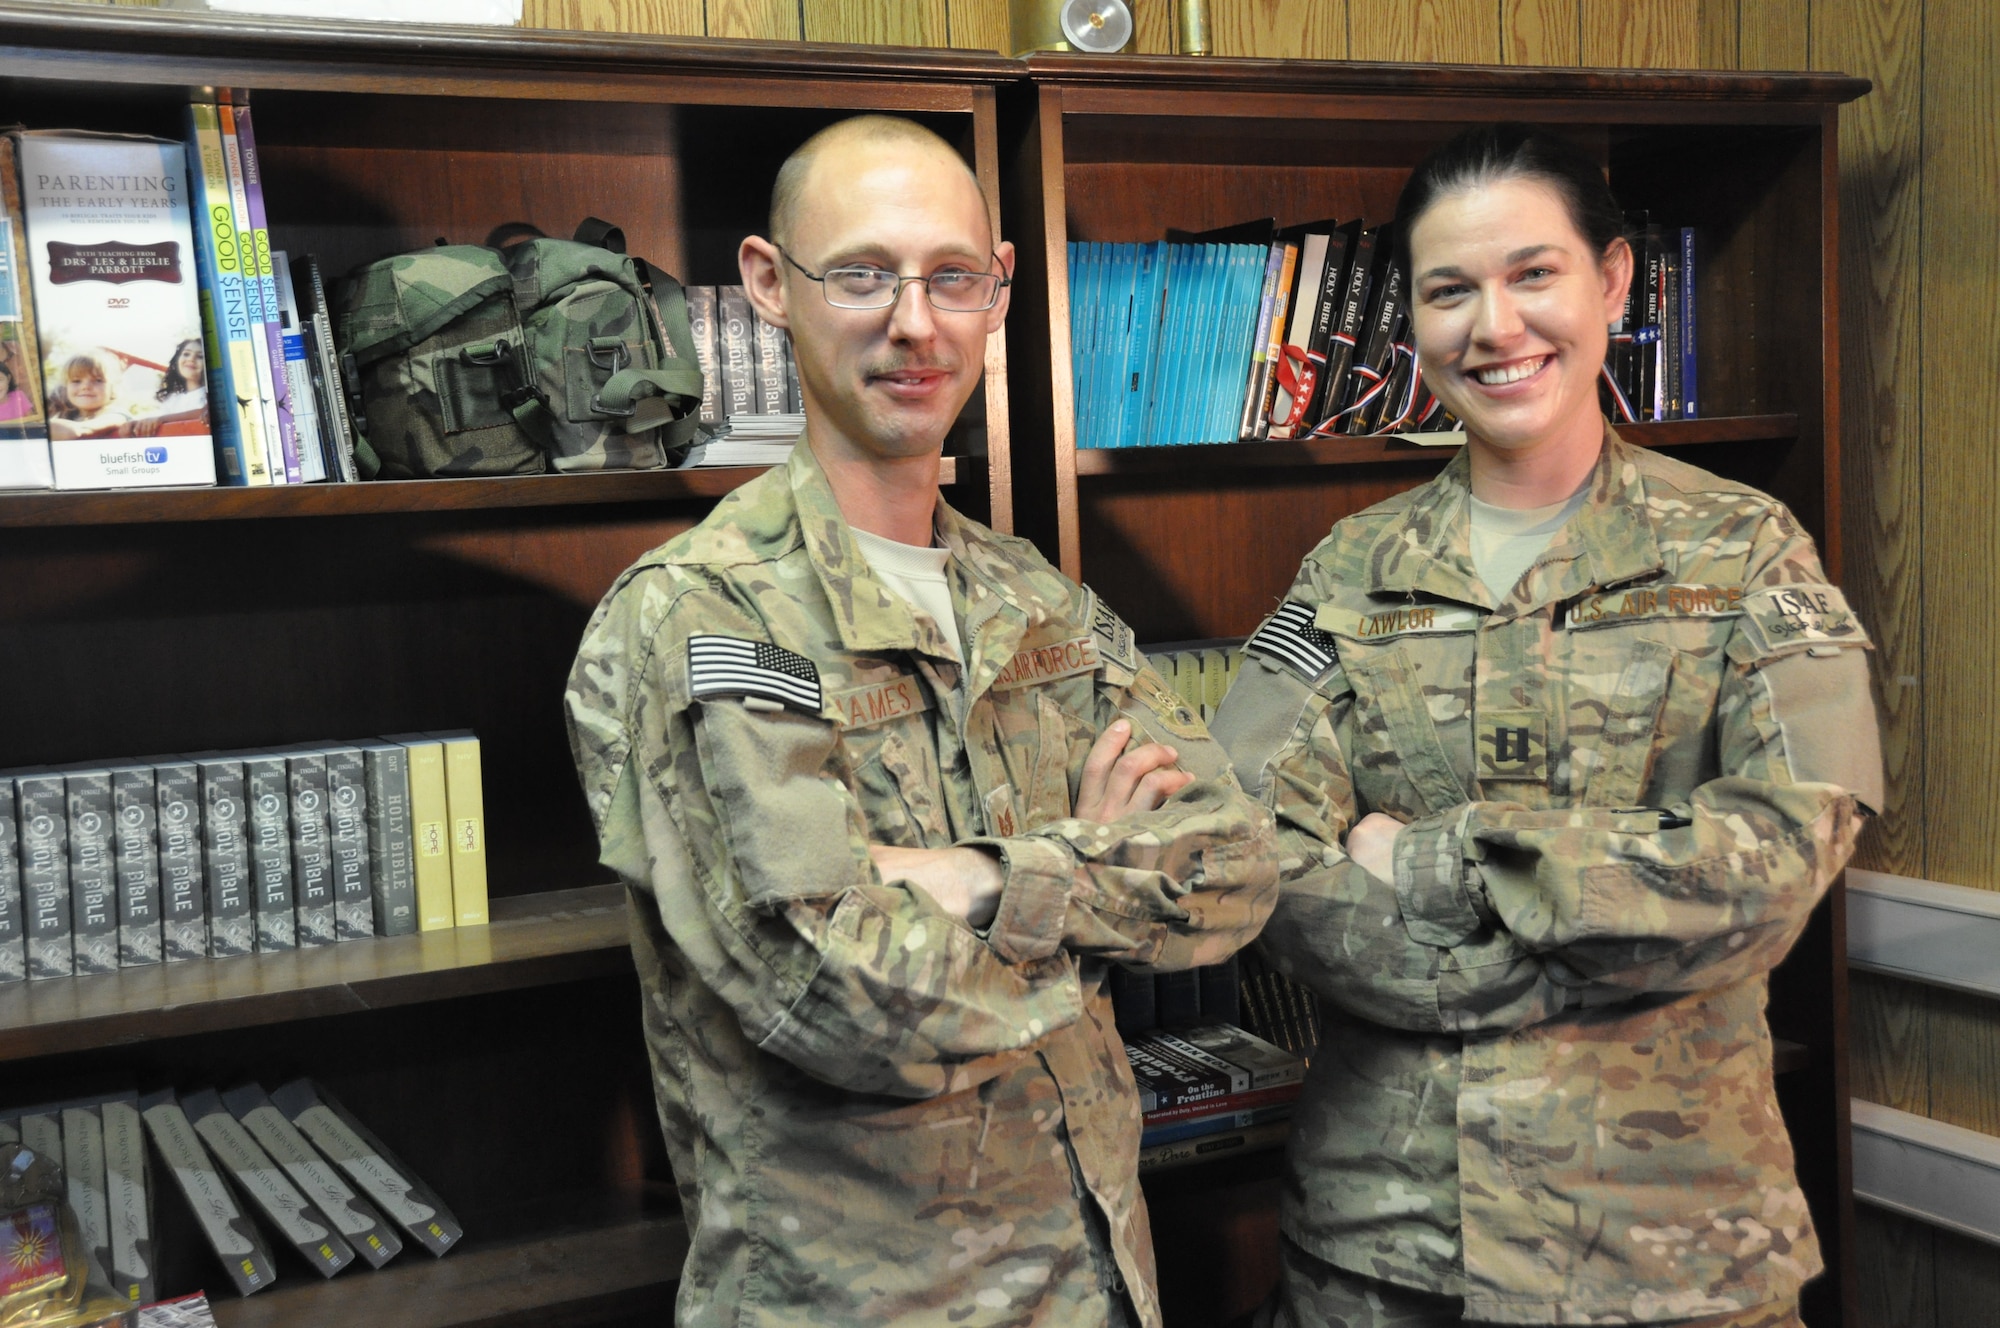 Chaplain (Capt.) Molly Lawlor (right), 455th Air Expeditionary Wing Flightline Chaplain, and TSgt Steven James, Chaplain's Assistant, regularly meet with pilots, maintainers, and support personnel between devotionals and worship services at Bagram Airfield, Afghanistan, July 29, 2012. The Chaplain Corps' Religious Support Teams provide a mission-specific "visual reminder of the holy" for various units in a deployed environment. (U.S. Air Force photo/TSgt Shawn McCowan)